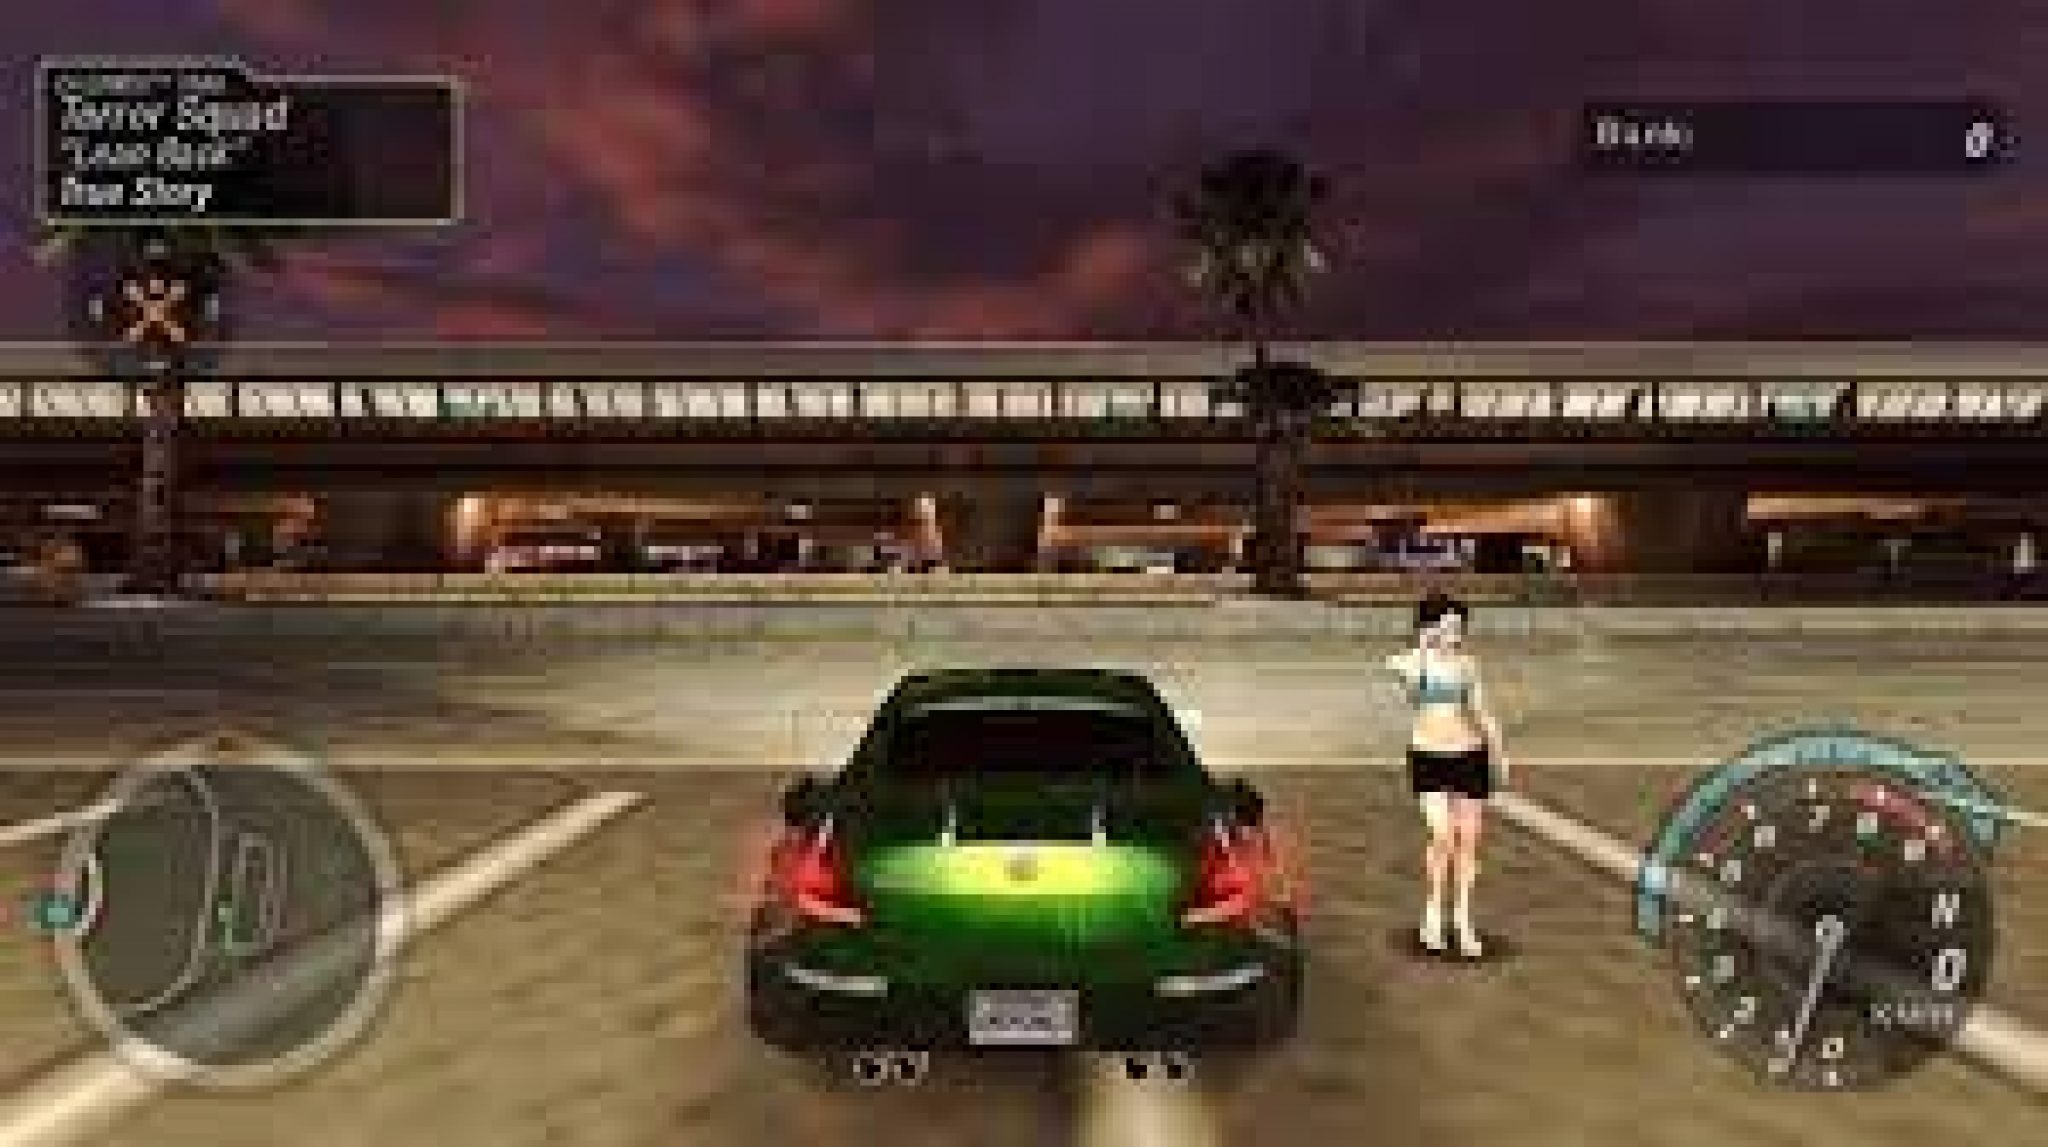 need for speed underground 2 android download apk